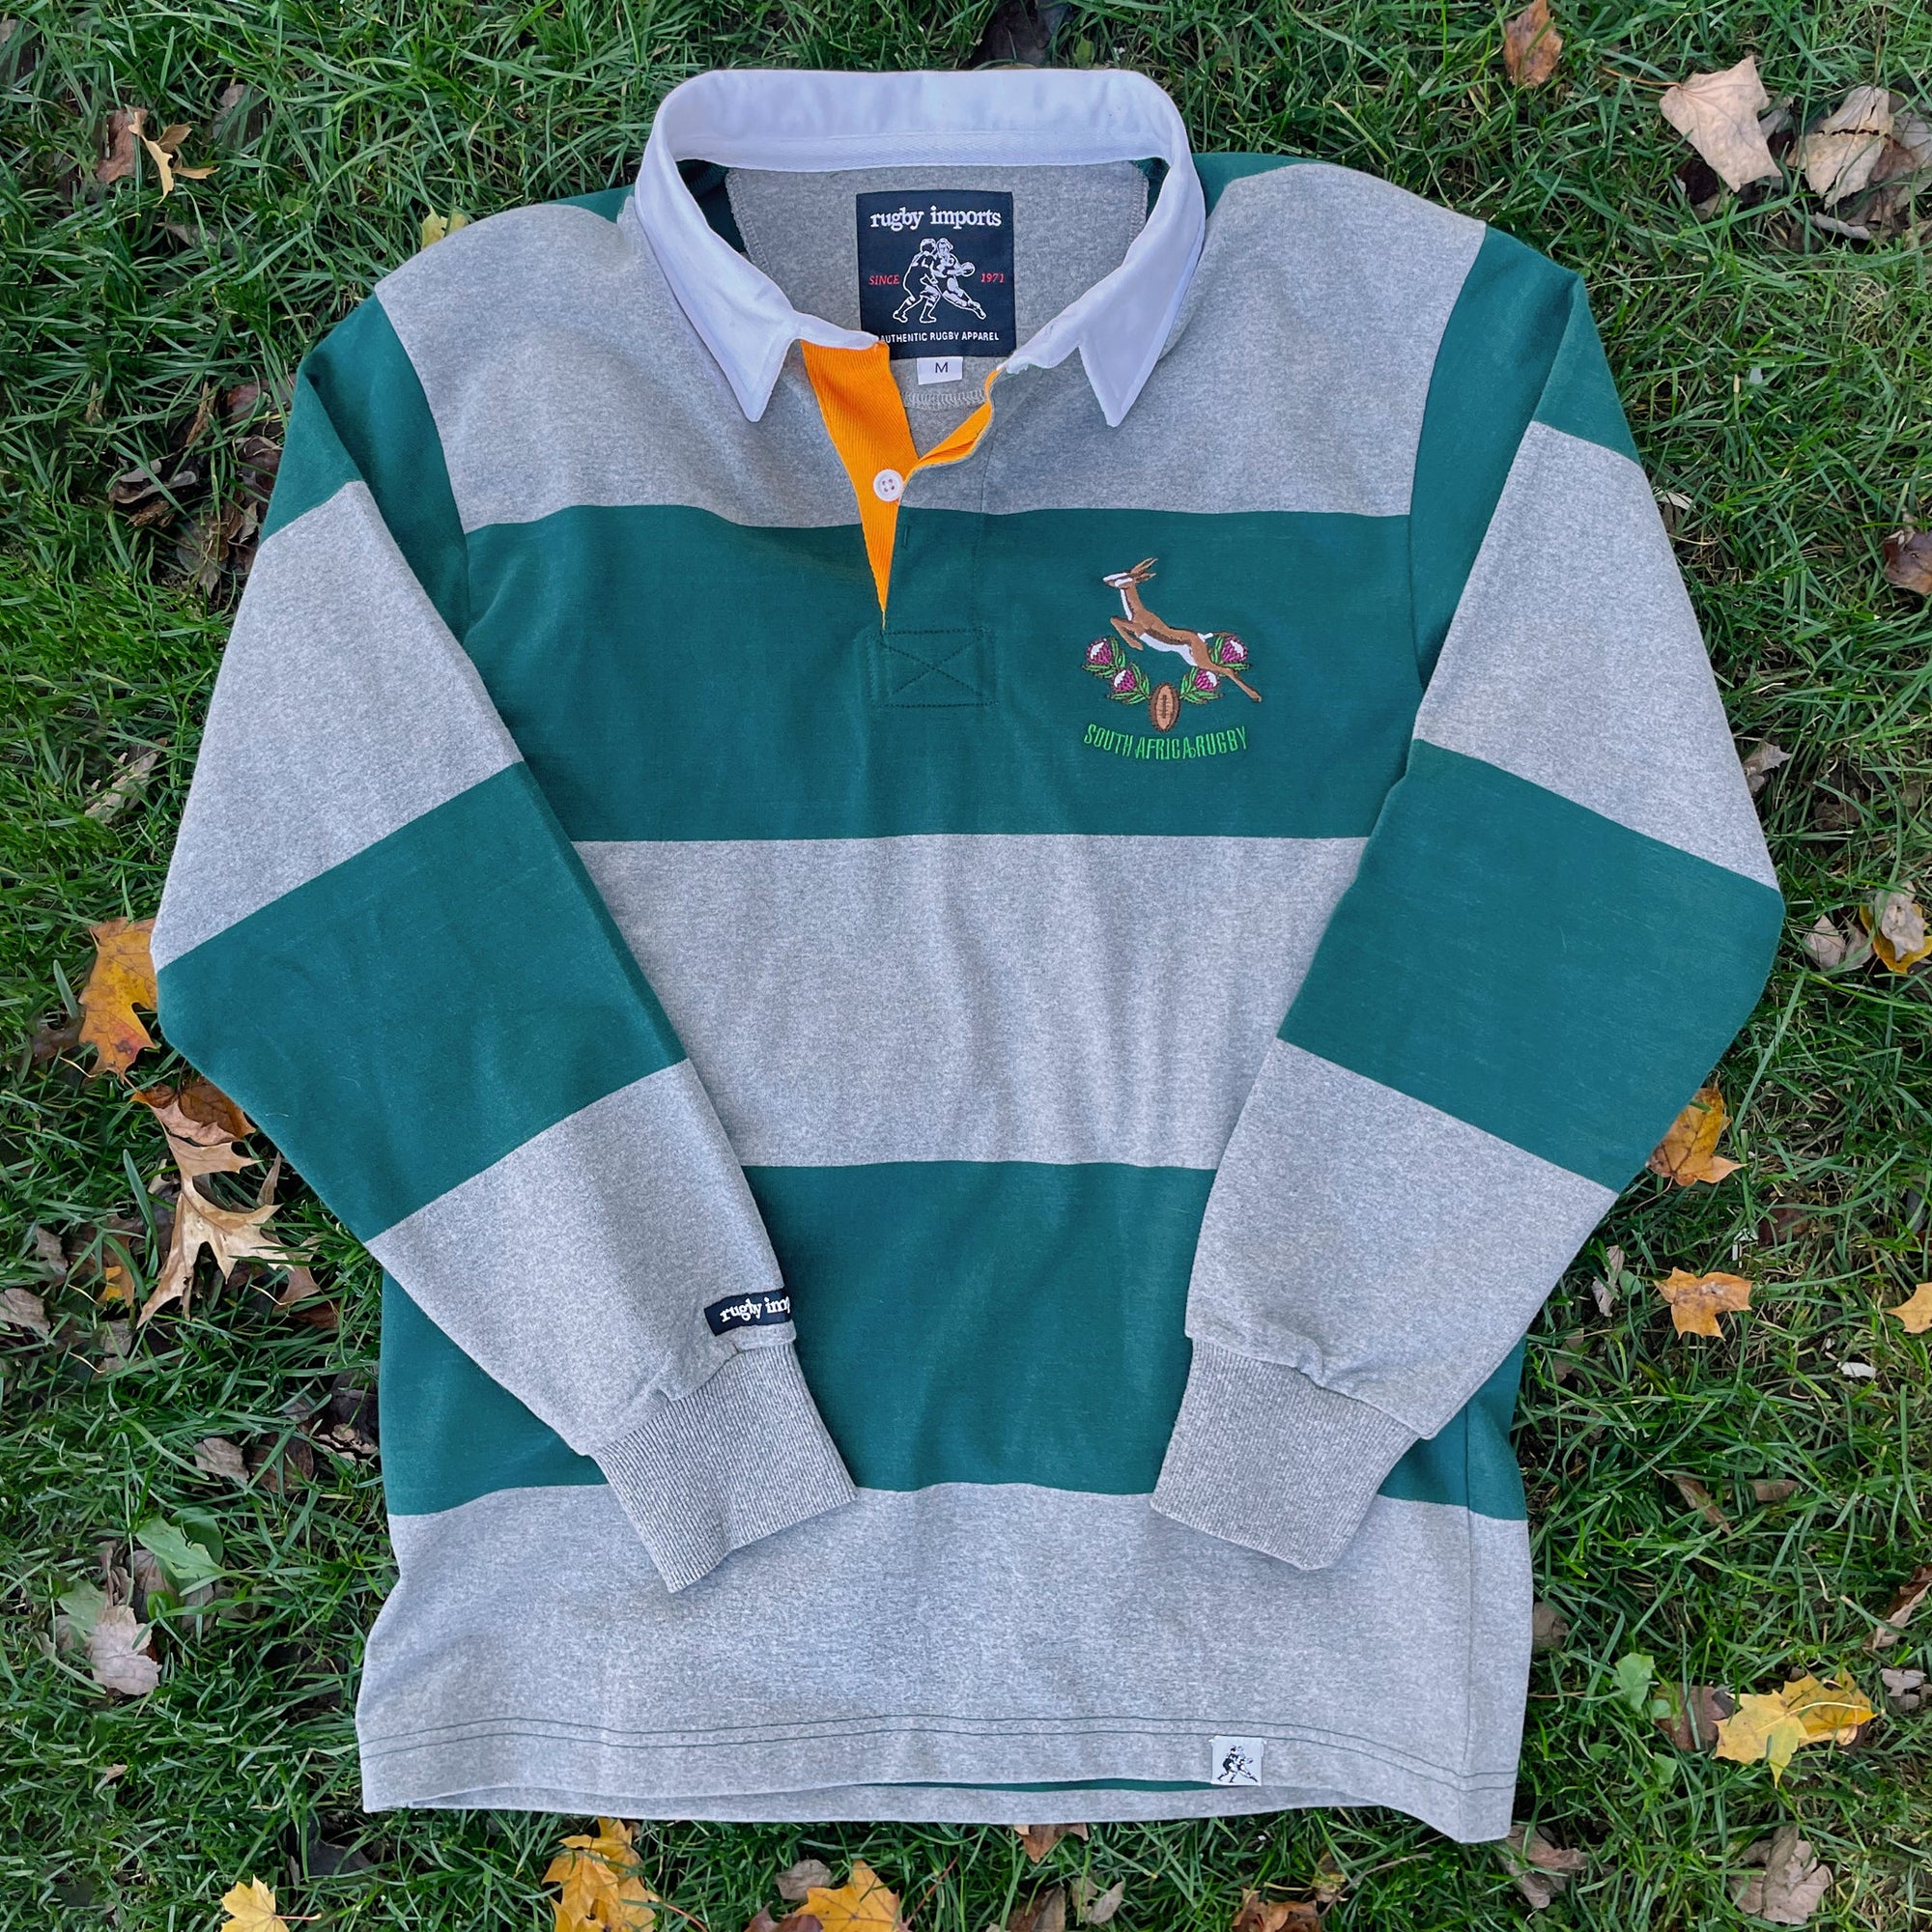 Imports - Authentic Rugby gear, Apparel & Teamwear